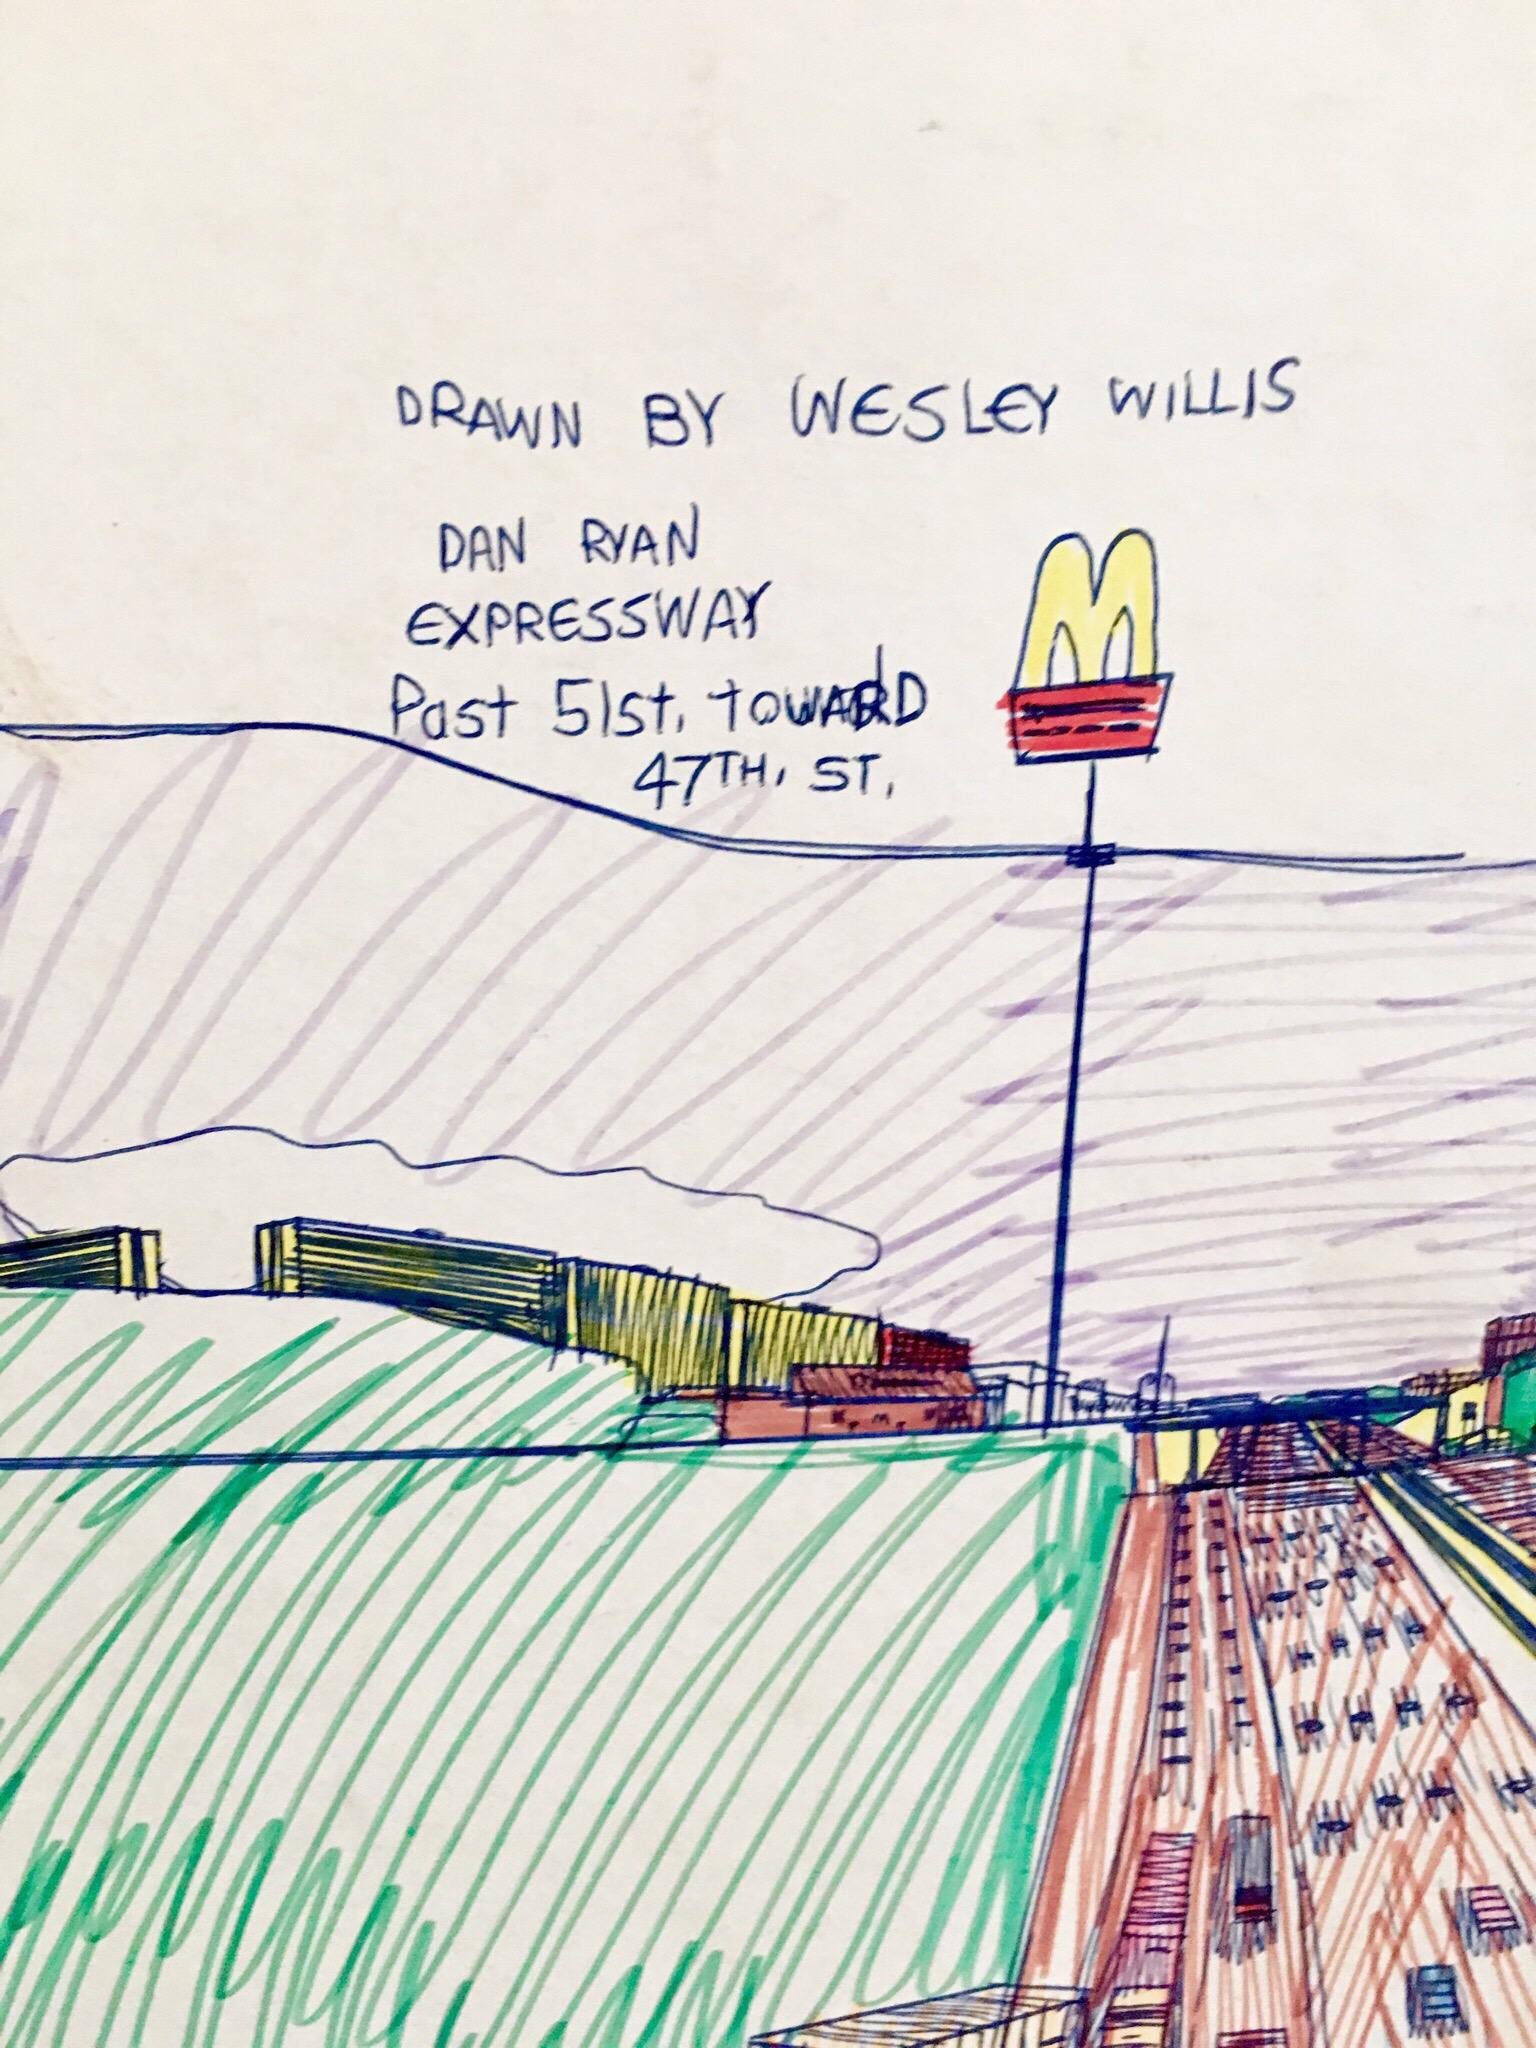 What comes to mind when you hear those two words, Wesley Willis? The song 